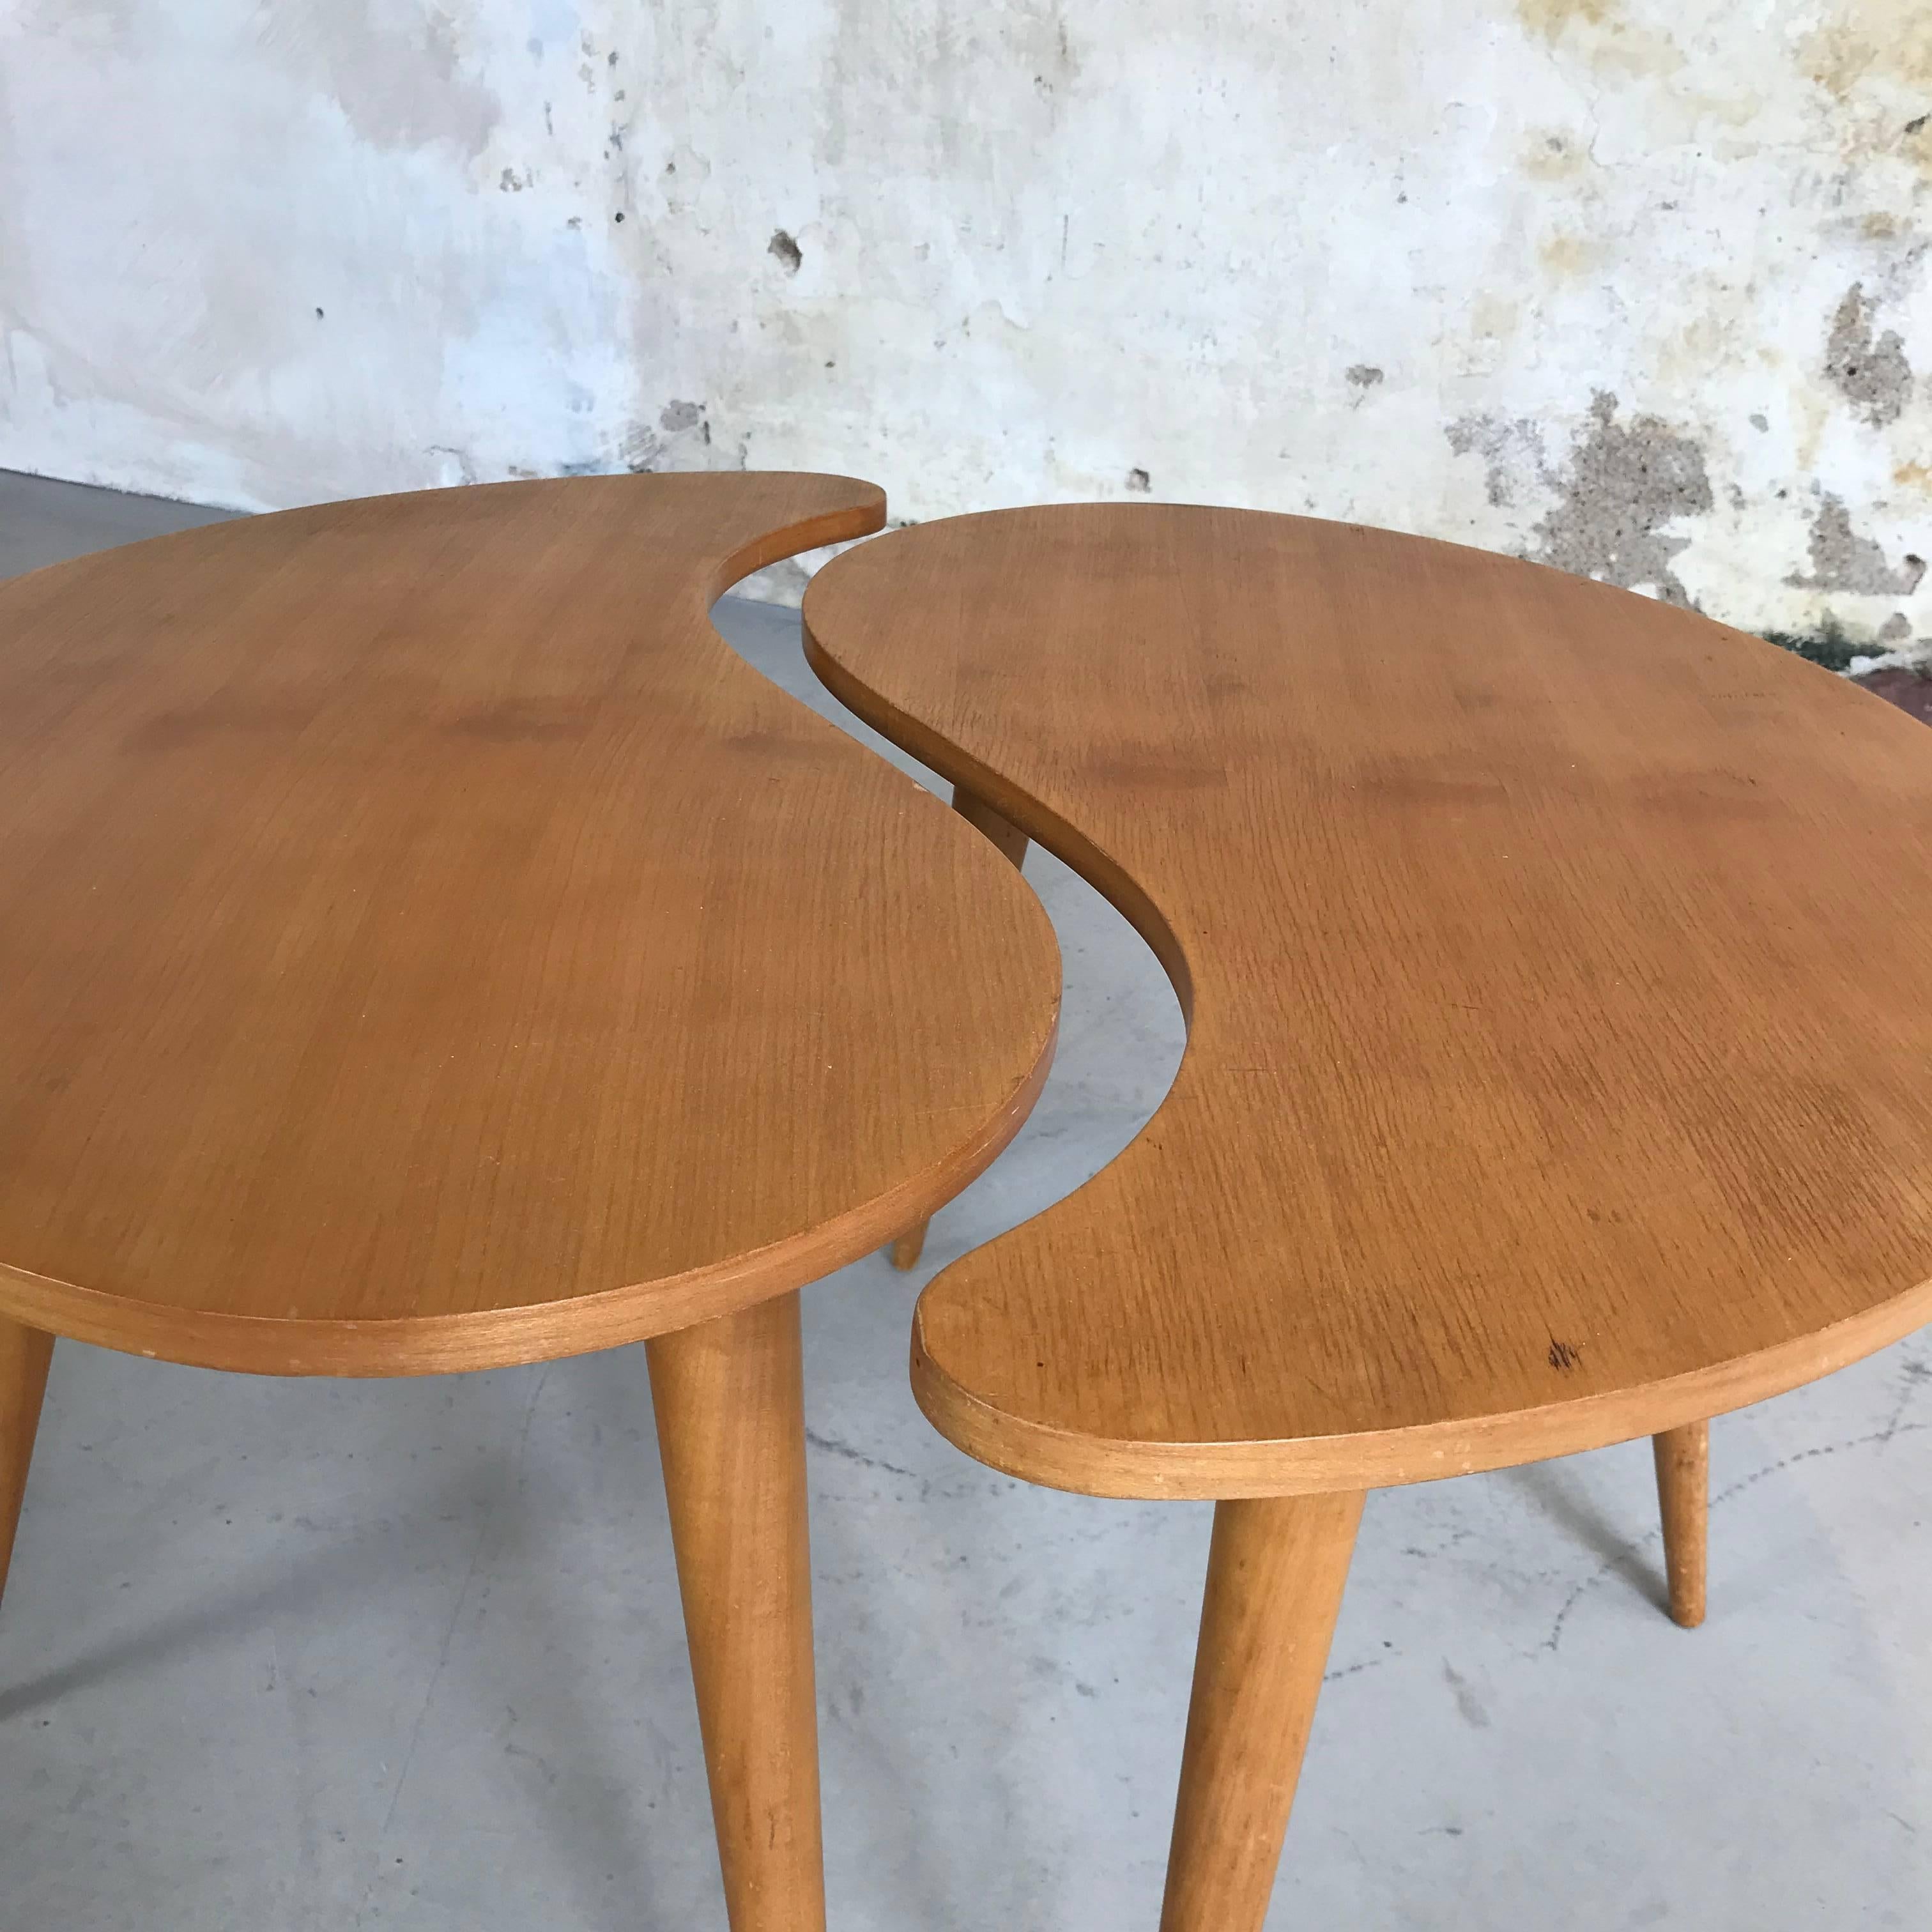 Veneer Rare Awesome Dutch Kidney-Shaped Coffee Table Set from ‘Gelderland NV’, 1950s